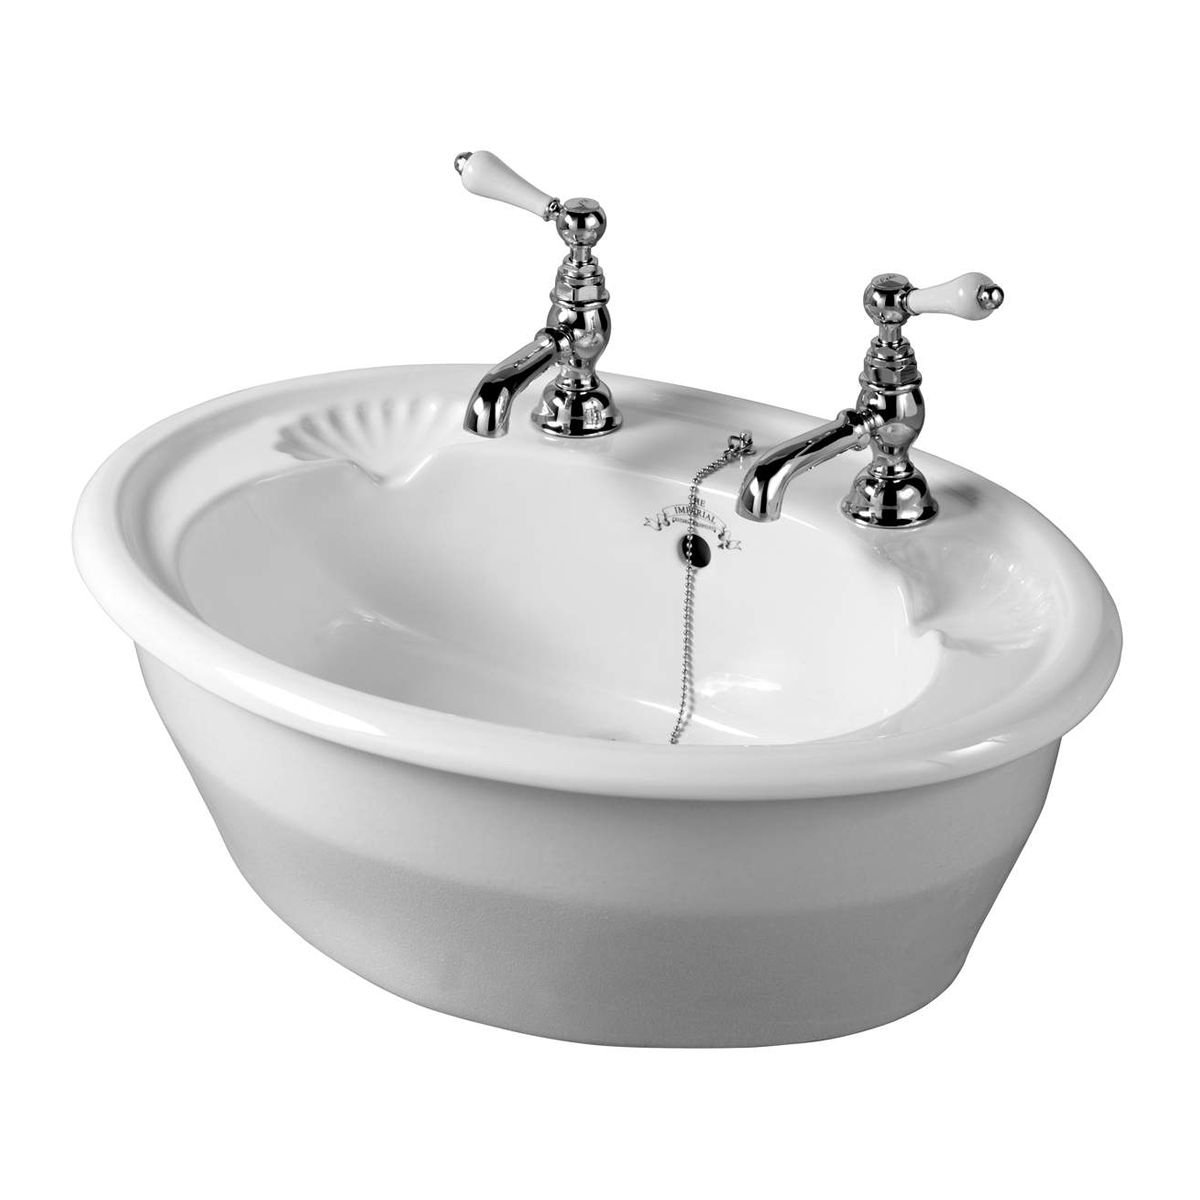 Inset basin by Imperial Bathrooms